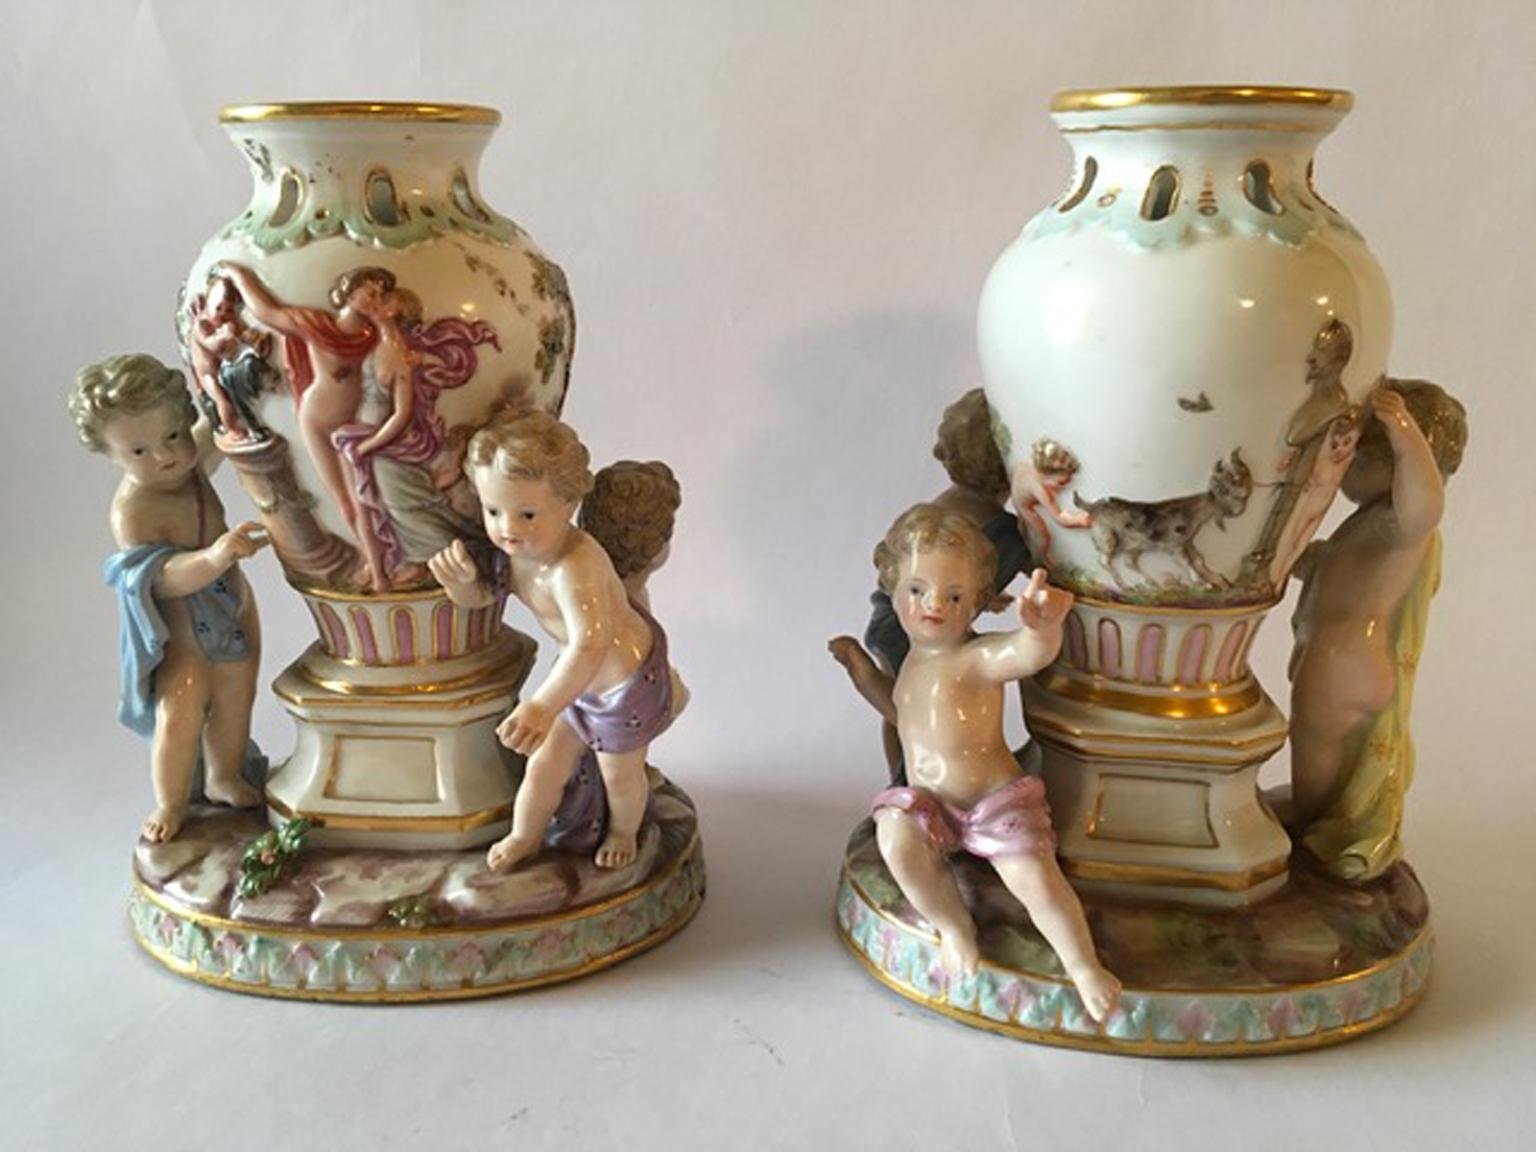 Elegant pair of Meissen vases on stand with child figures. The vases are decorated with mythological scenes on the surface.
Marked on the foot.
With certificate of authenticity.
Two arms restored.

 